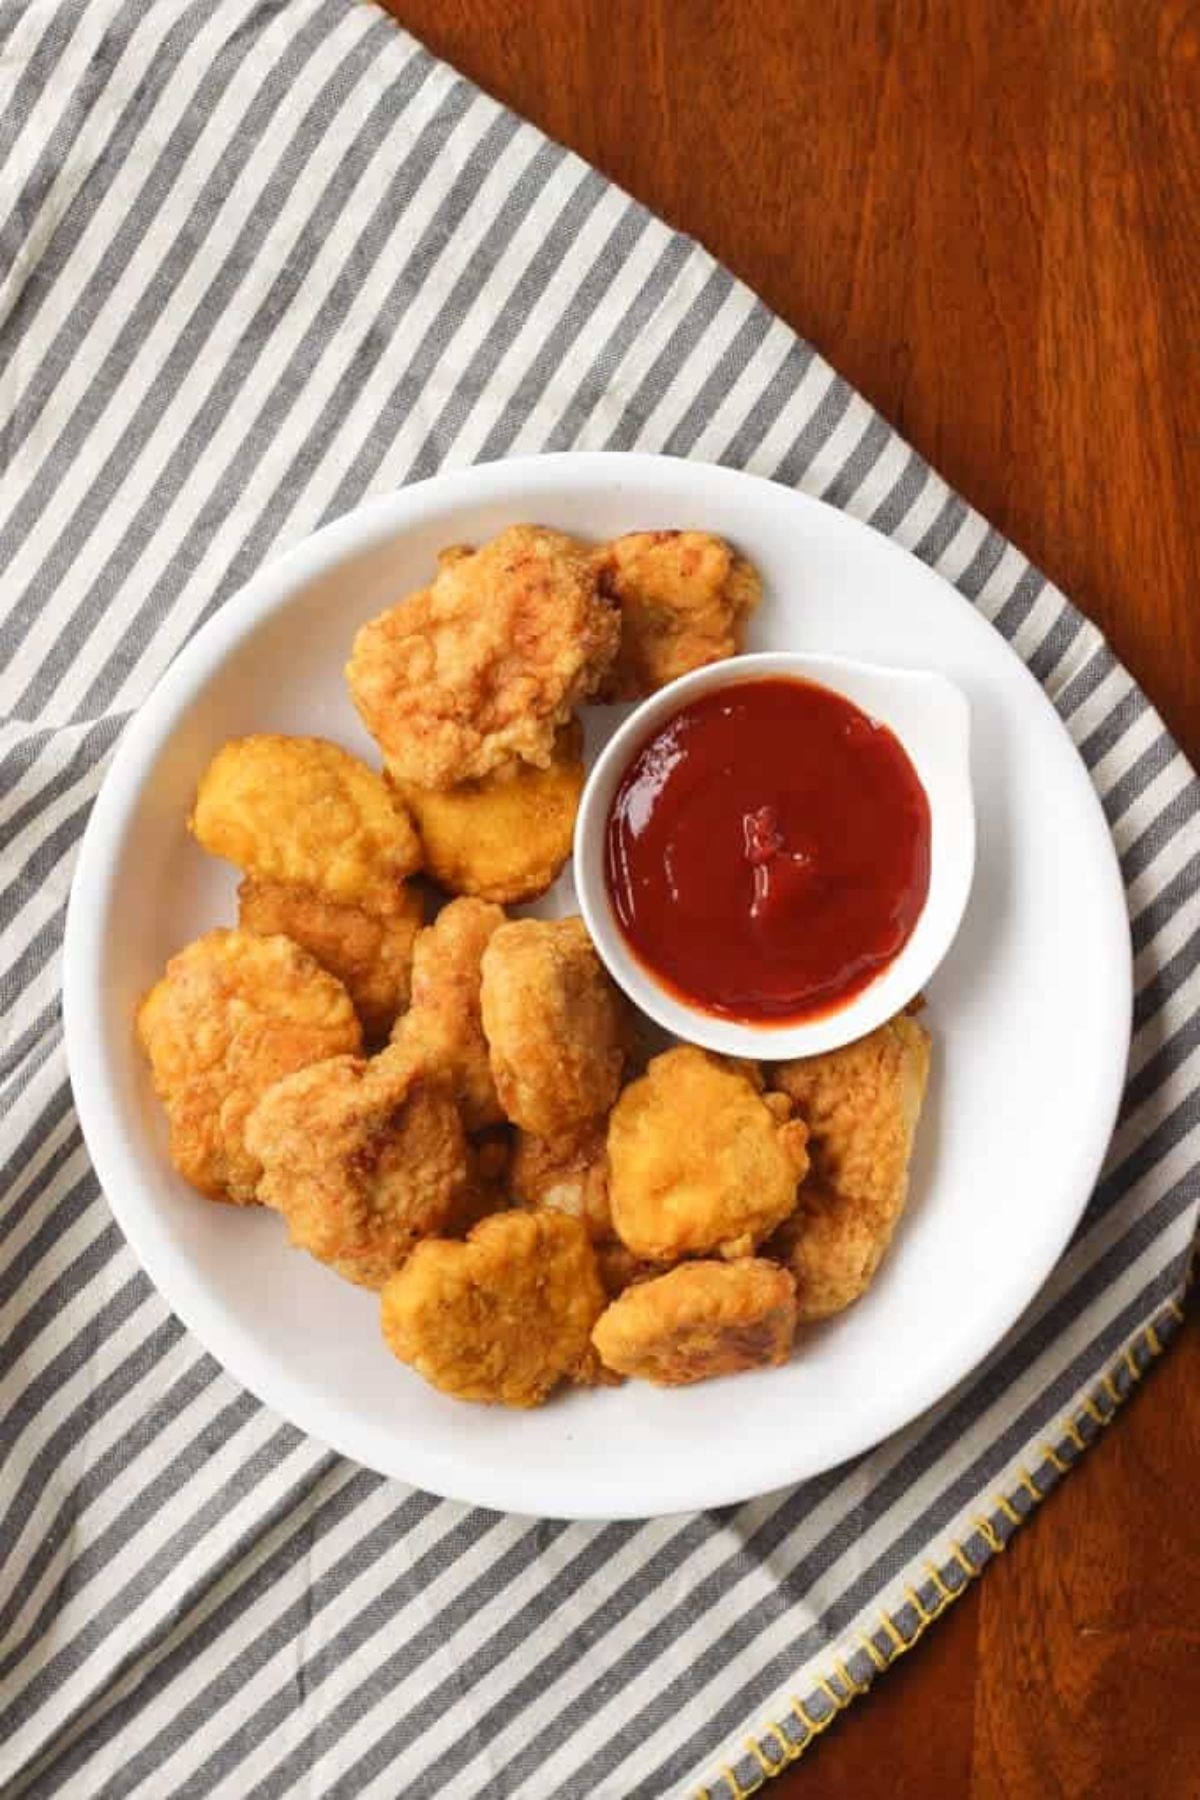 A white plate of chicken nuggets with a smaller bowl of red sauce